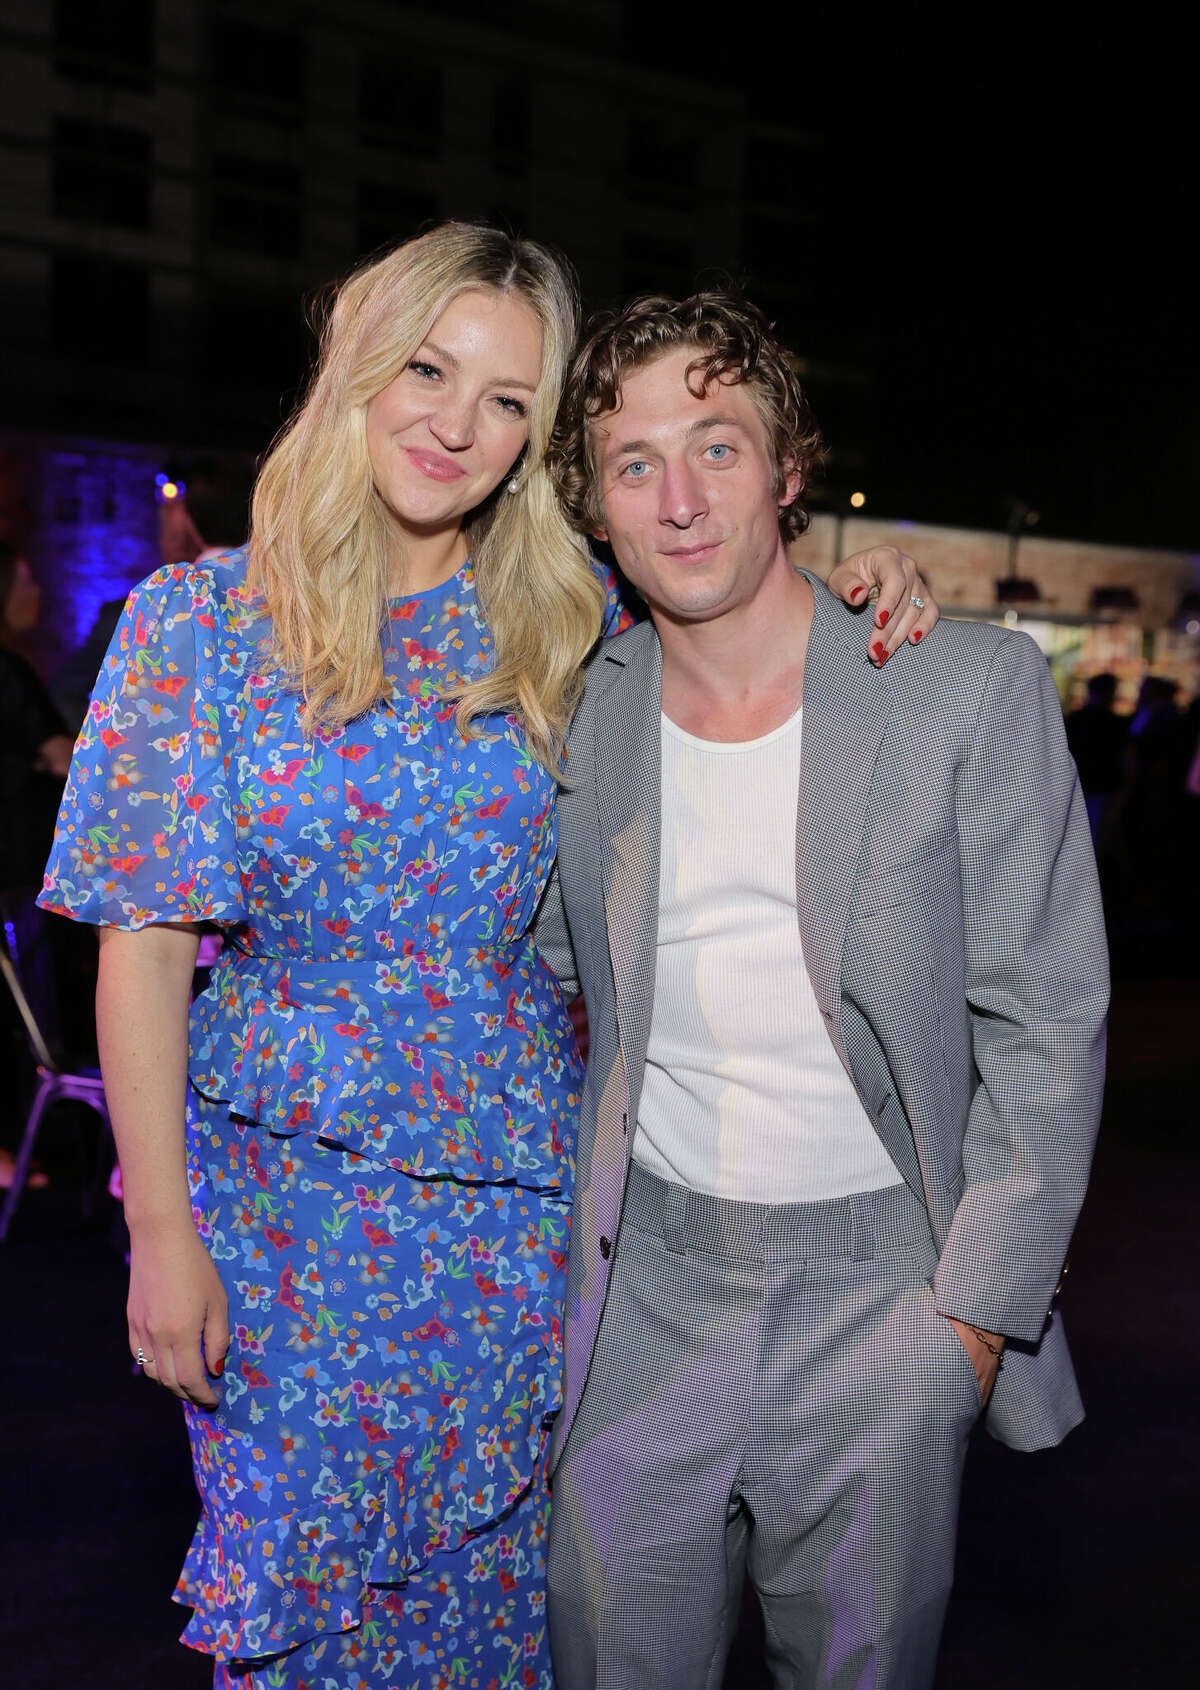 LOS ANGELES, CALIFORNIA - JUNE 20: Abby Elliott (L) and Jeremy Allen White (R) attend FX's "The Bear" Los Angeles premiere after party at Goya Studios on June 20, 2022 in Los Angeles, California. (Photo by Amy Sussman/Getty Images)